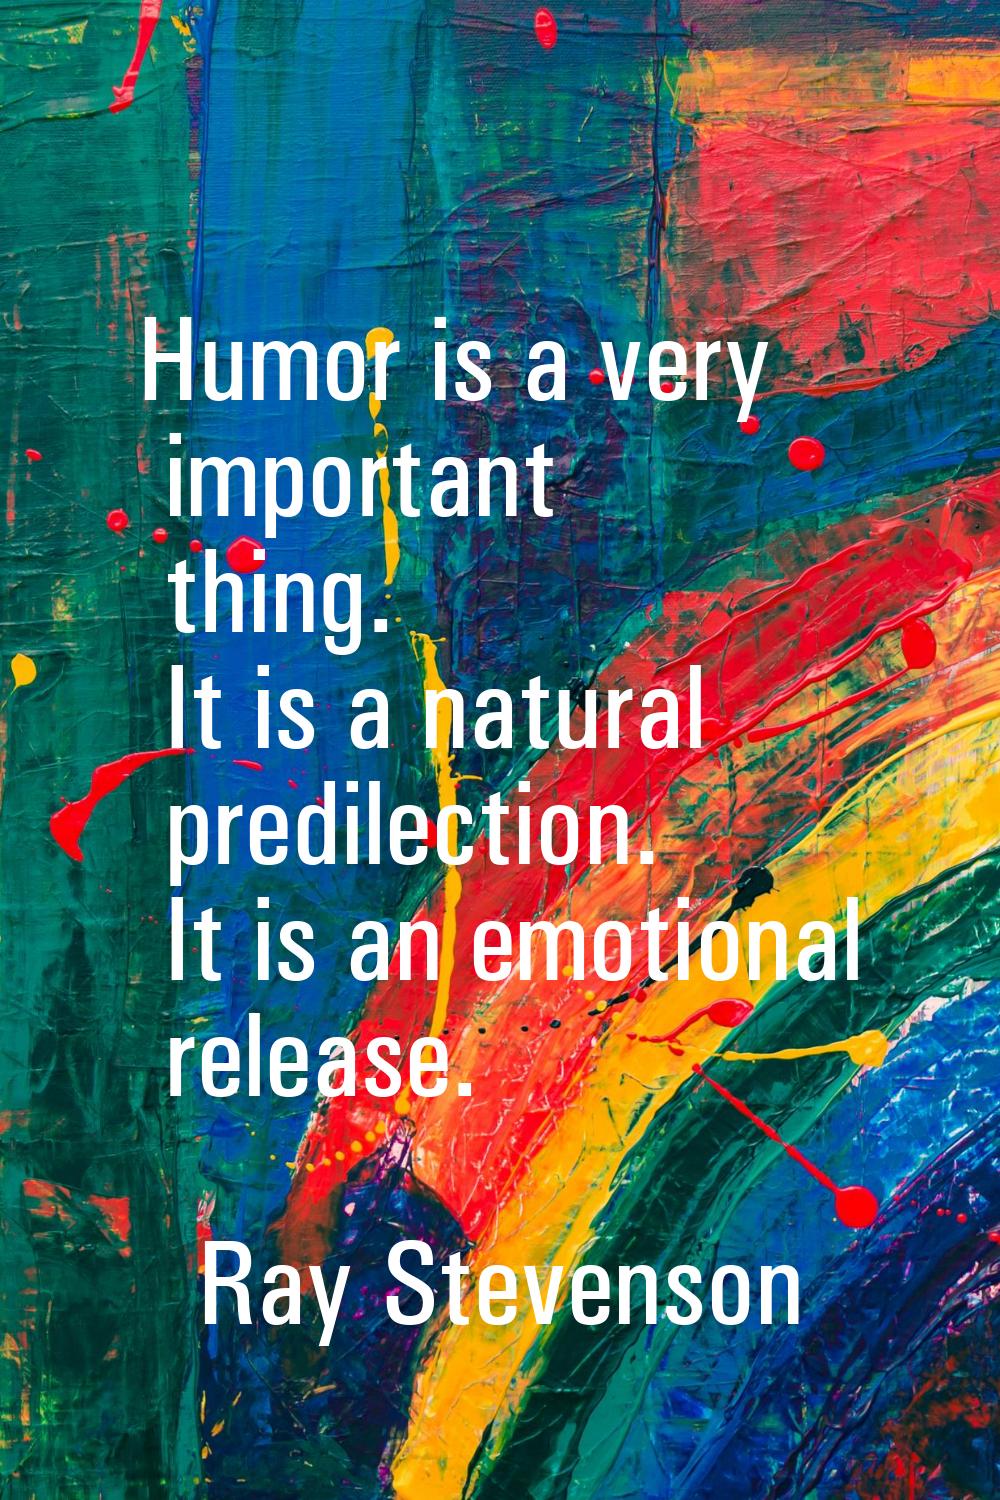 Humor is a very important thing. It is a natural predilection. It is an emotional release.